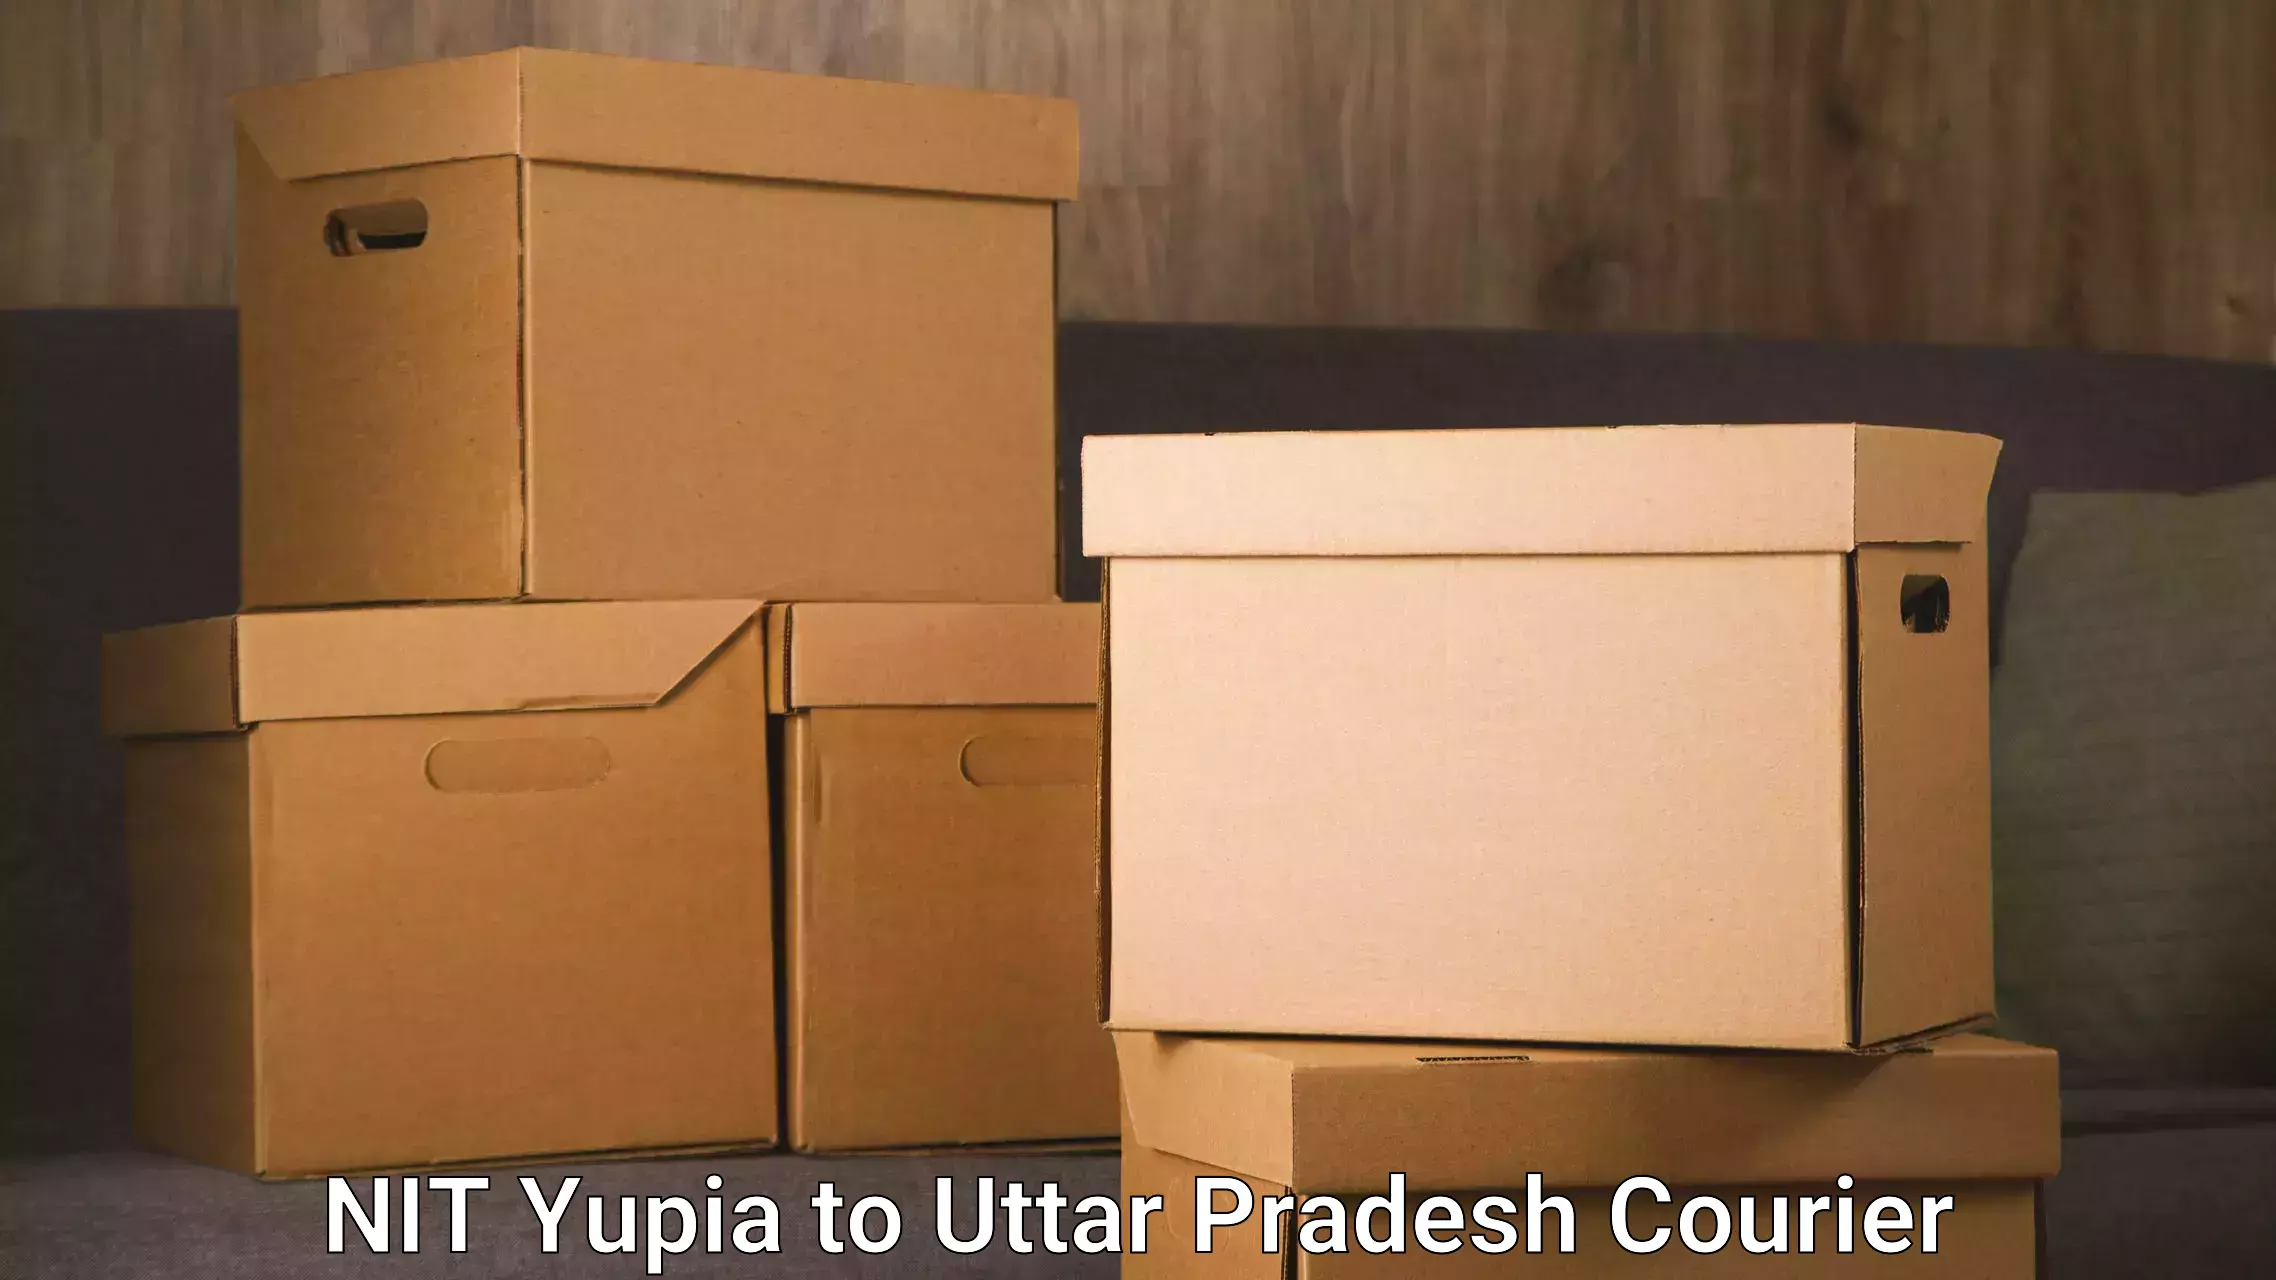 Courier insurance NIT Yupia to Aligarh